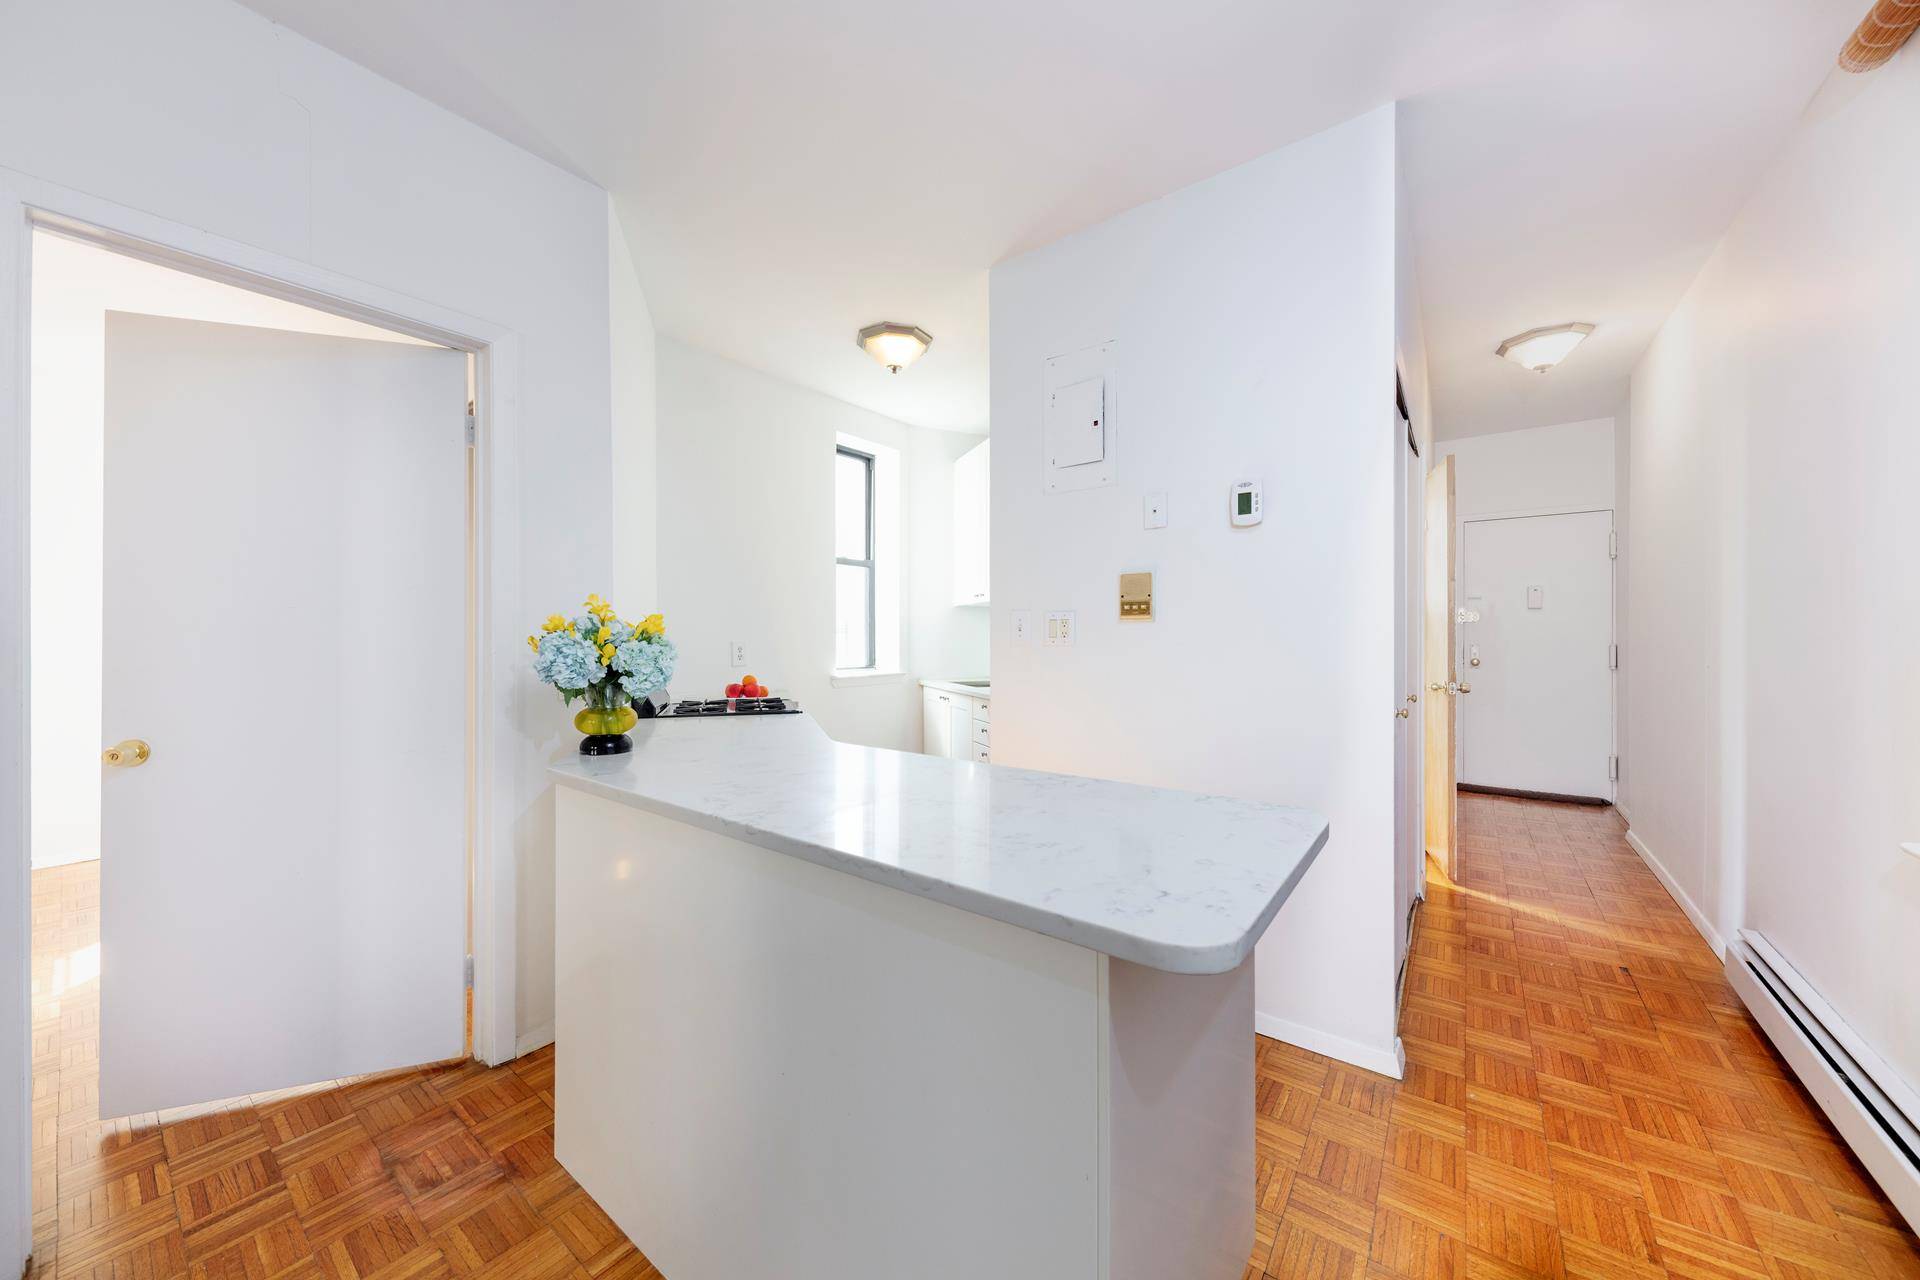 Hamilton Heights REAL TWO BEDROOM in a coop that does not have income restrictions has north and south facing windows for an excellent airy feeling.